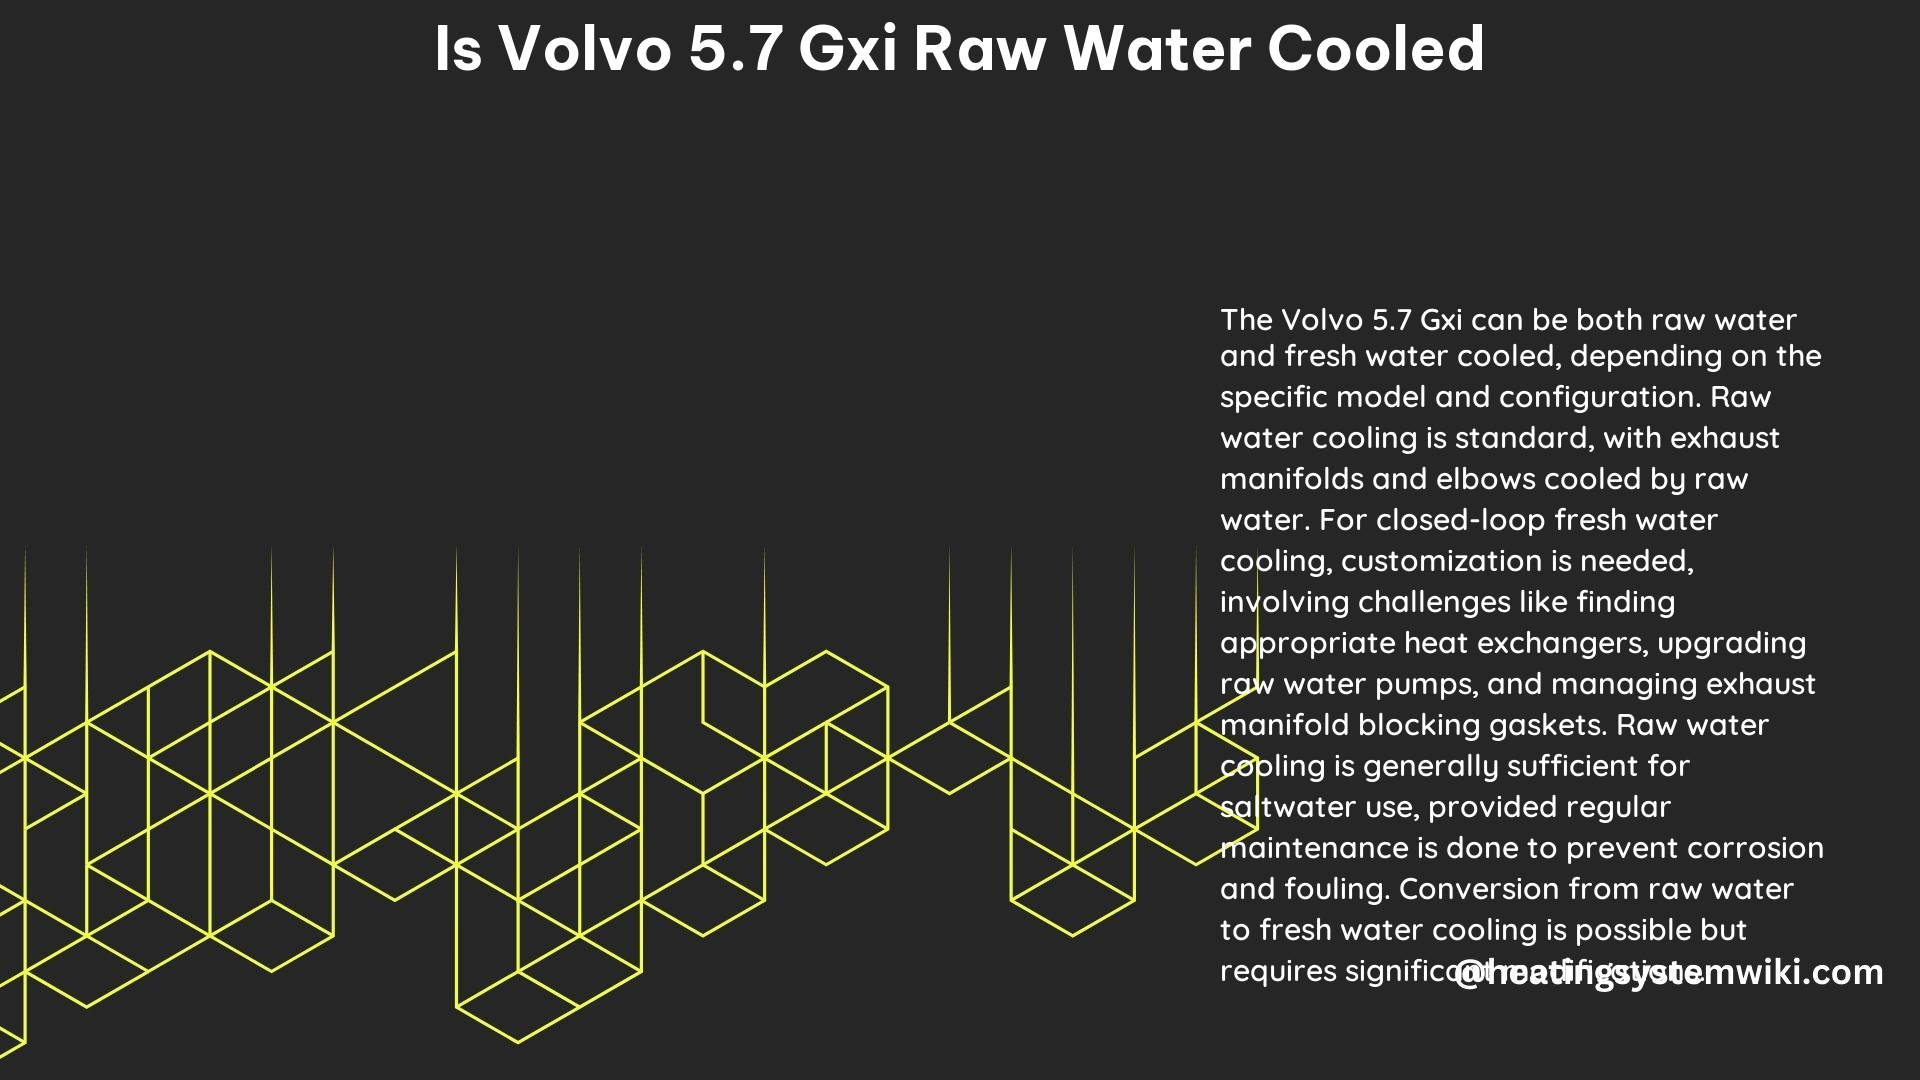 Is Volvo 5.7 Gxi Raw Water Cooled